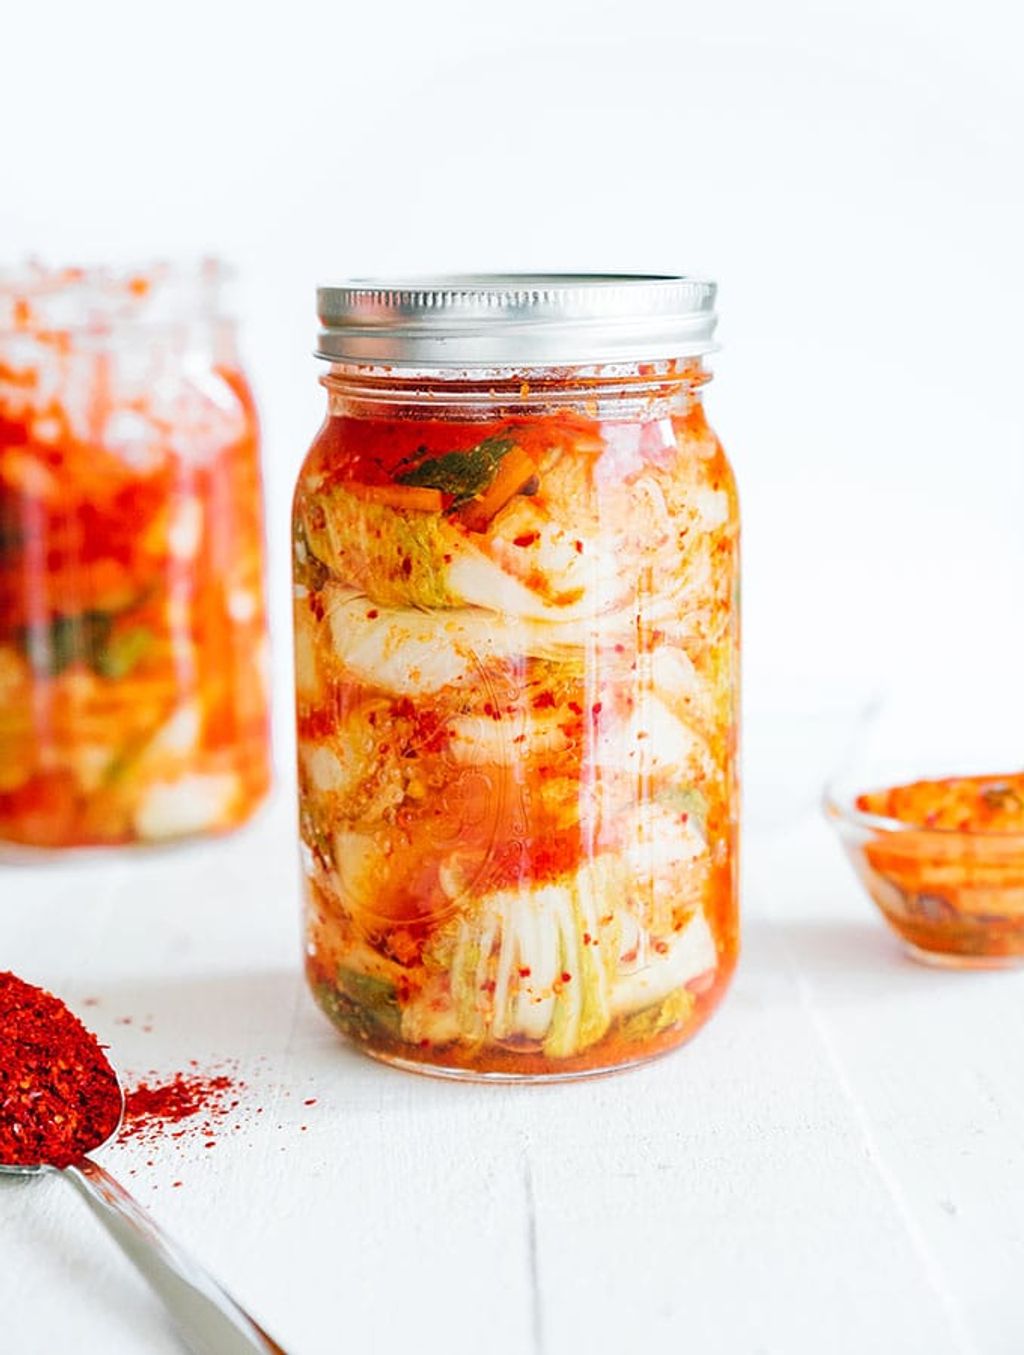 Ingredients You Need For Kimchi